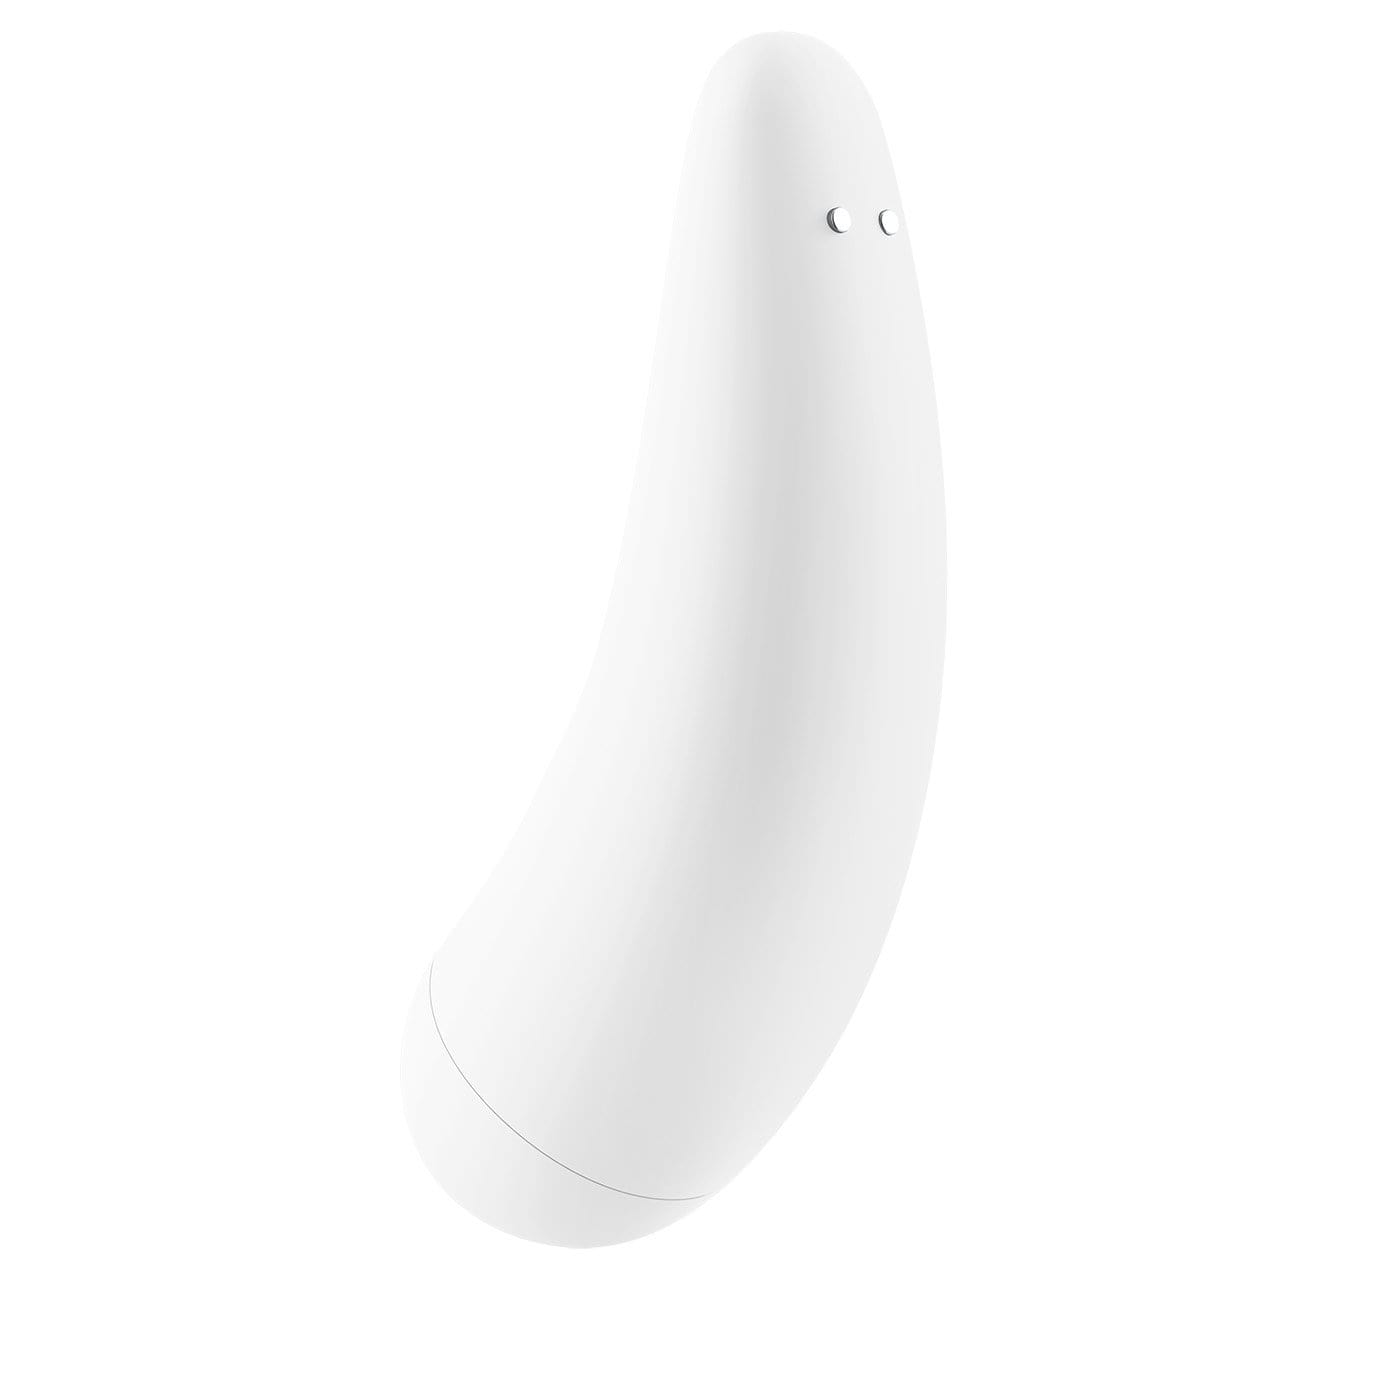 Satisfyer - Curvy 2+ App-Controlled Air Pulse Stimulator Vibrator (White) Clit Massager (Vibration) Rechargeable 289883003 CherryAffairs